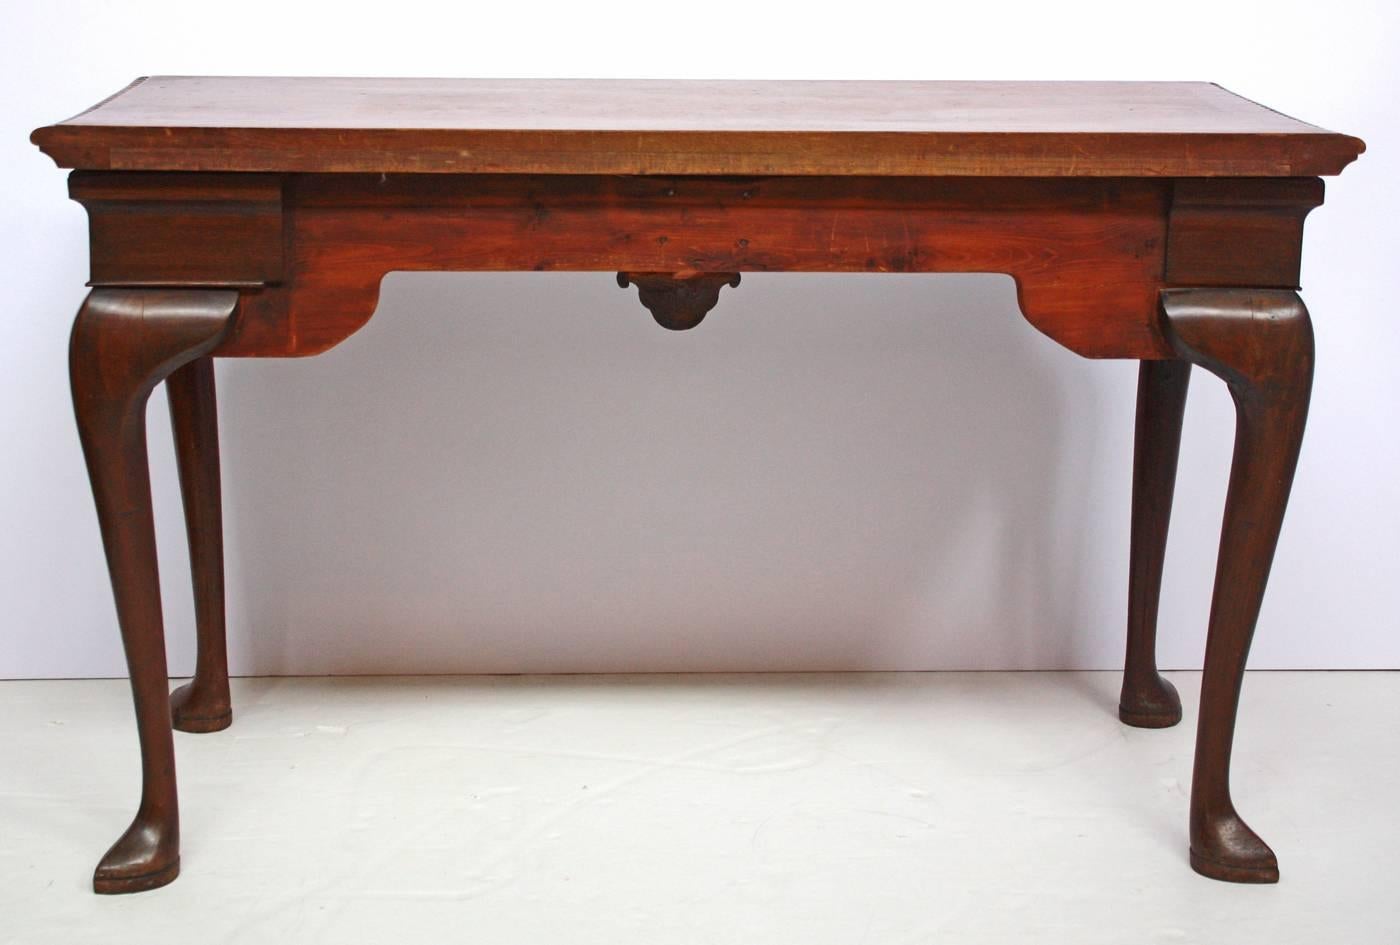 18th Century George II Irish Serving Table with Crest, a Cock's Head Erased